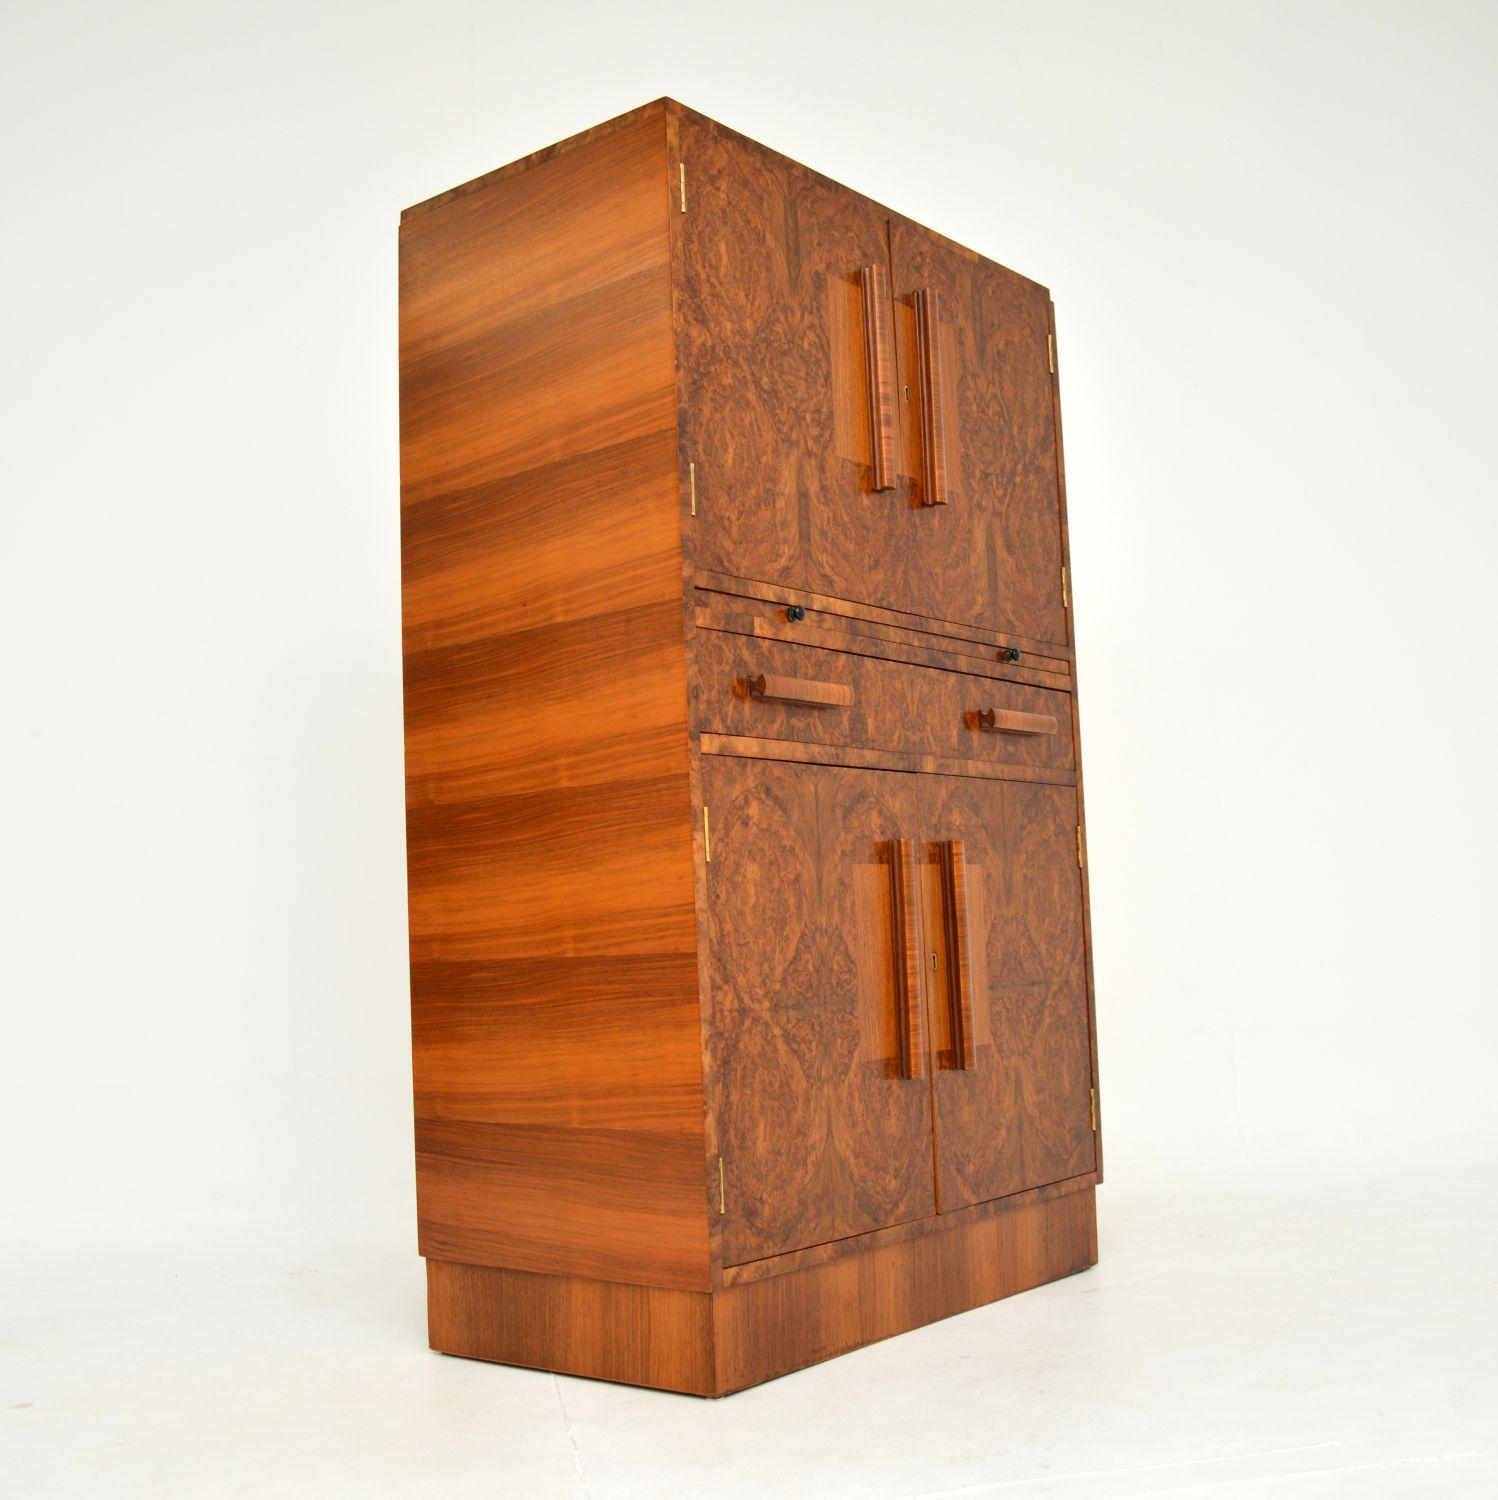 An absolutely stunning original Art Deco period cocktail drinks cabinet in burr walnut. This was made in England, it dates from the 1930’s.

The quality is outstanding, this is extremely well made. It has a stylish and compact design, with some